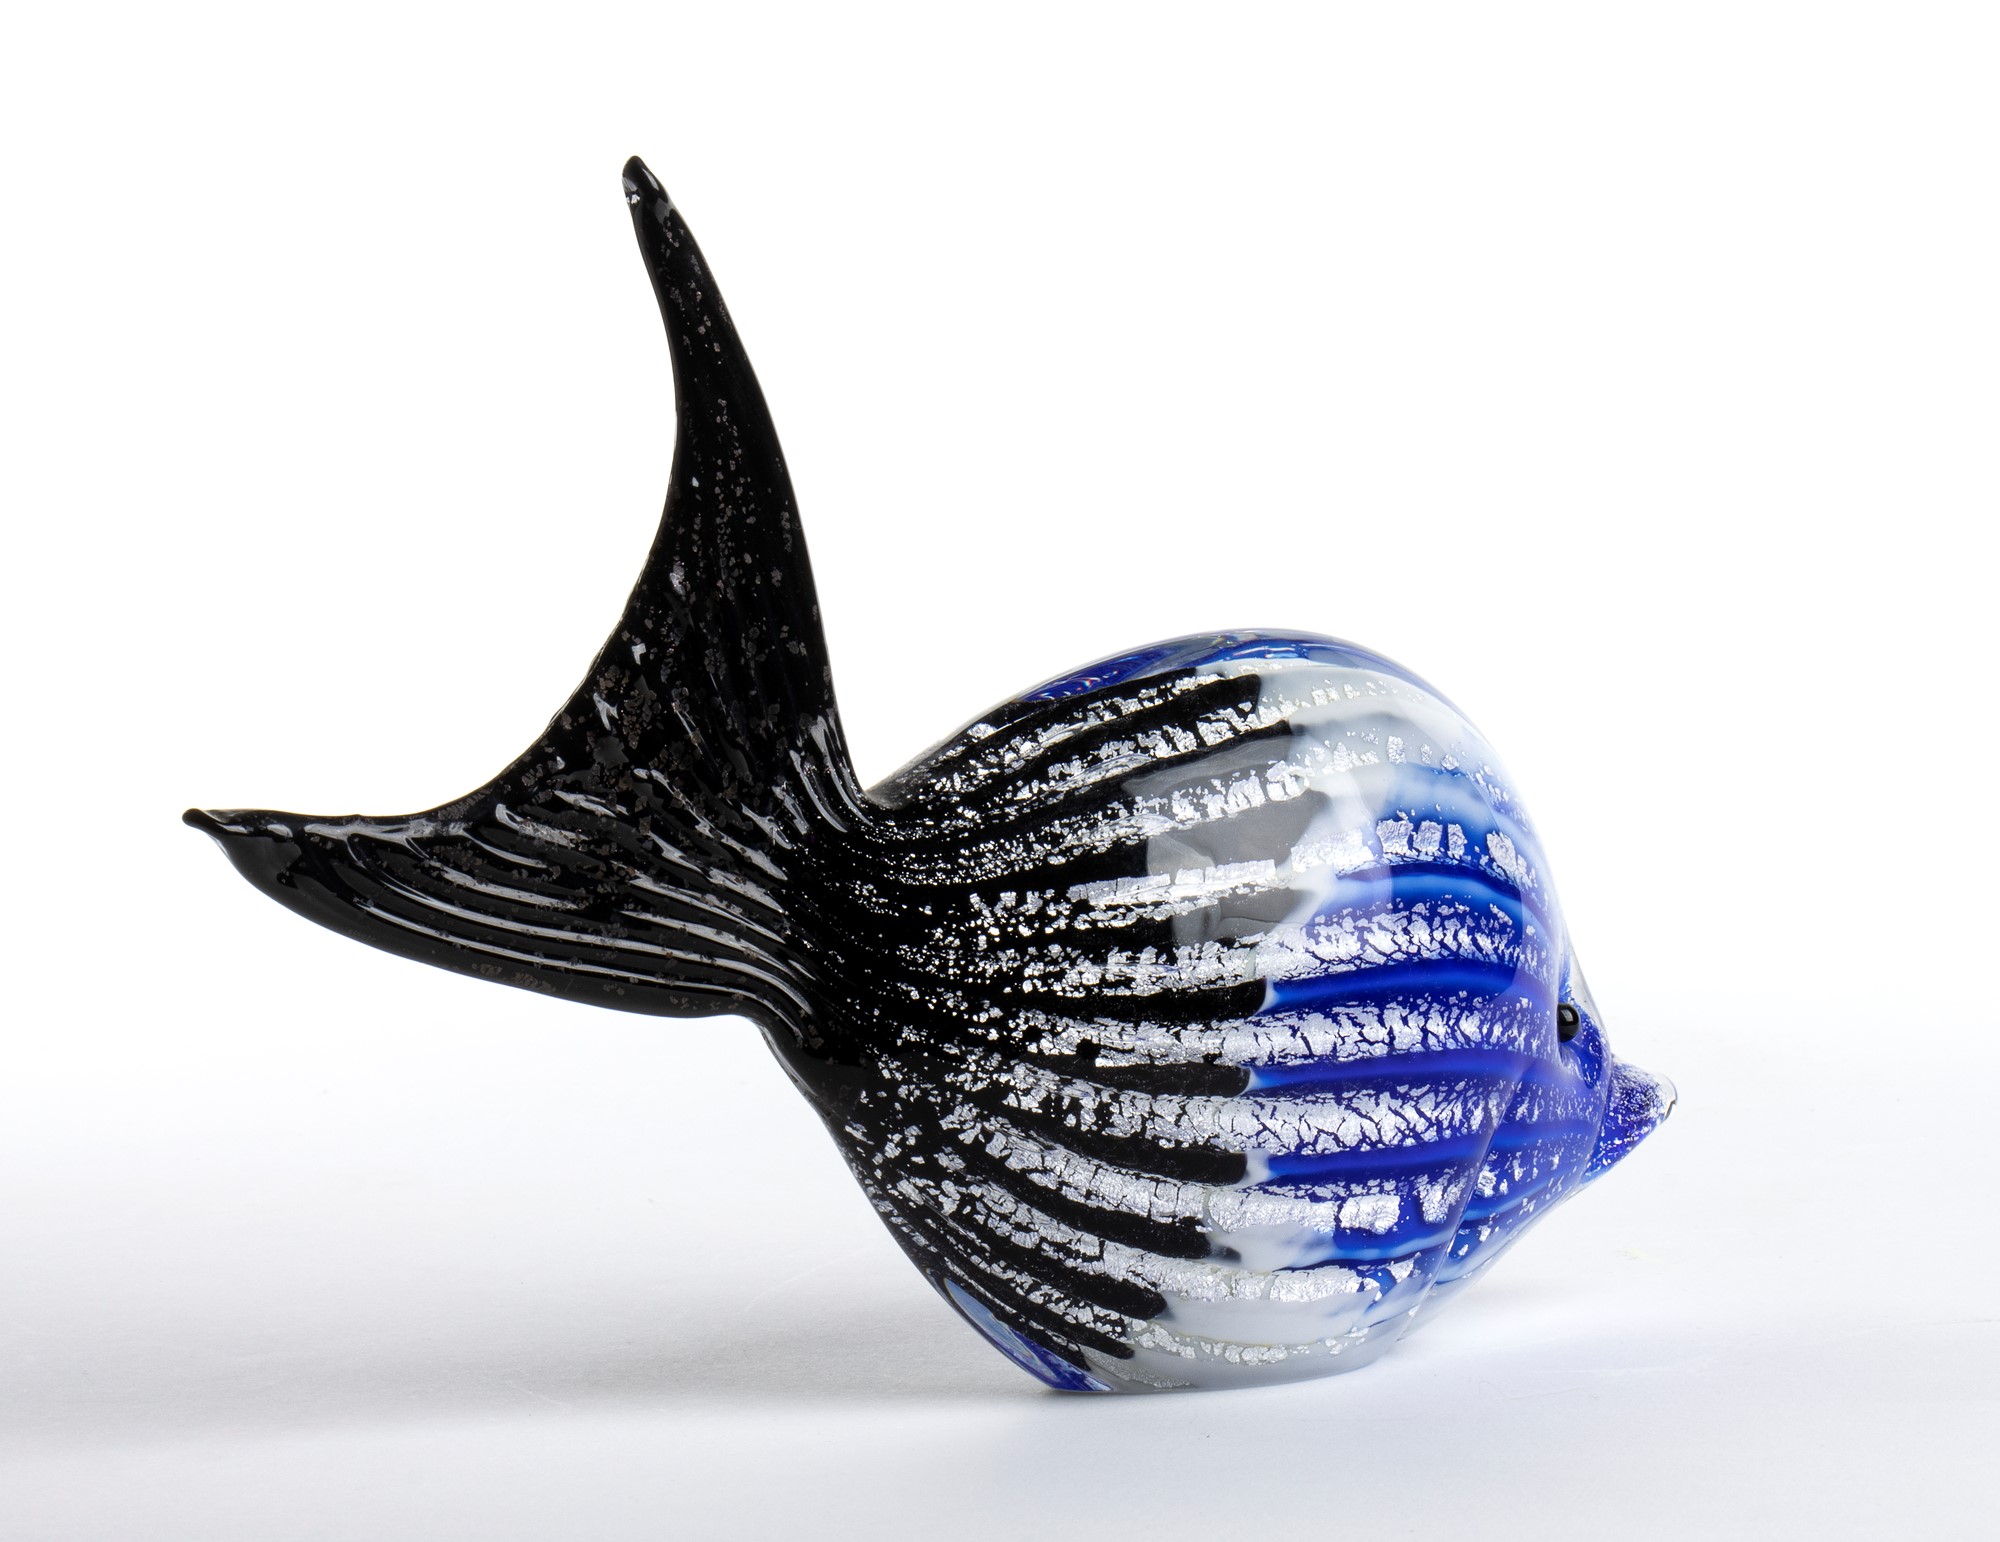 Small fish-shaped sculpture in Murano glass - Image 11 of 11